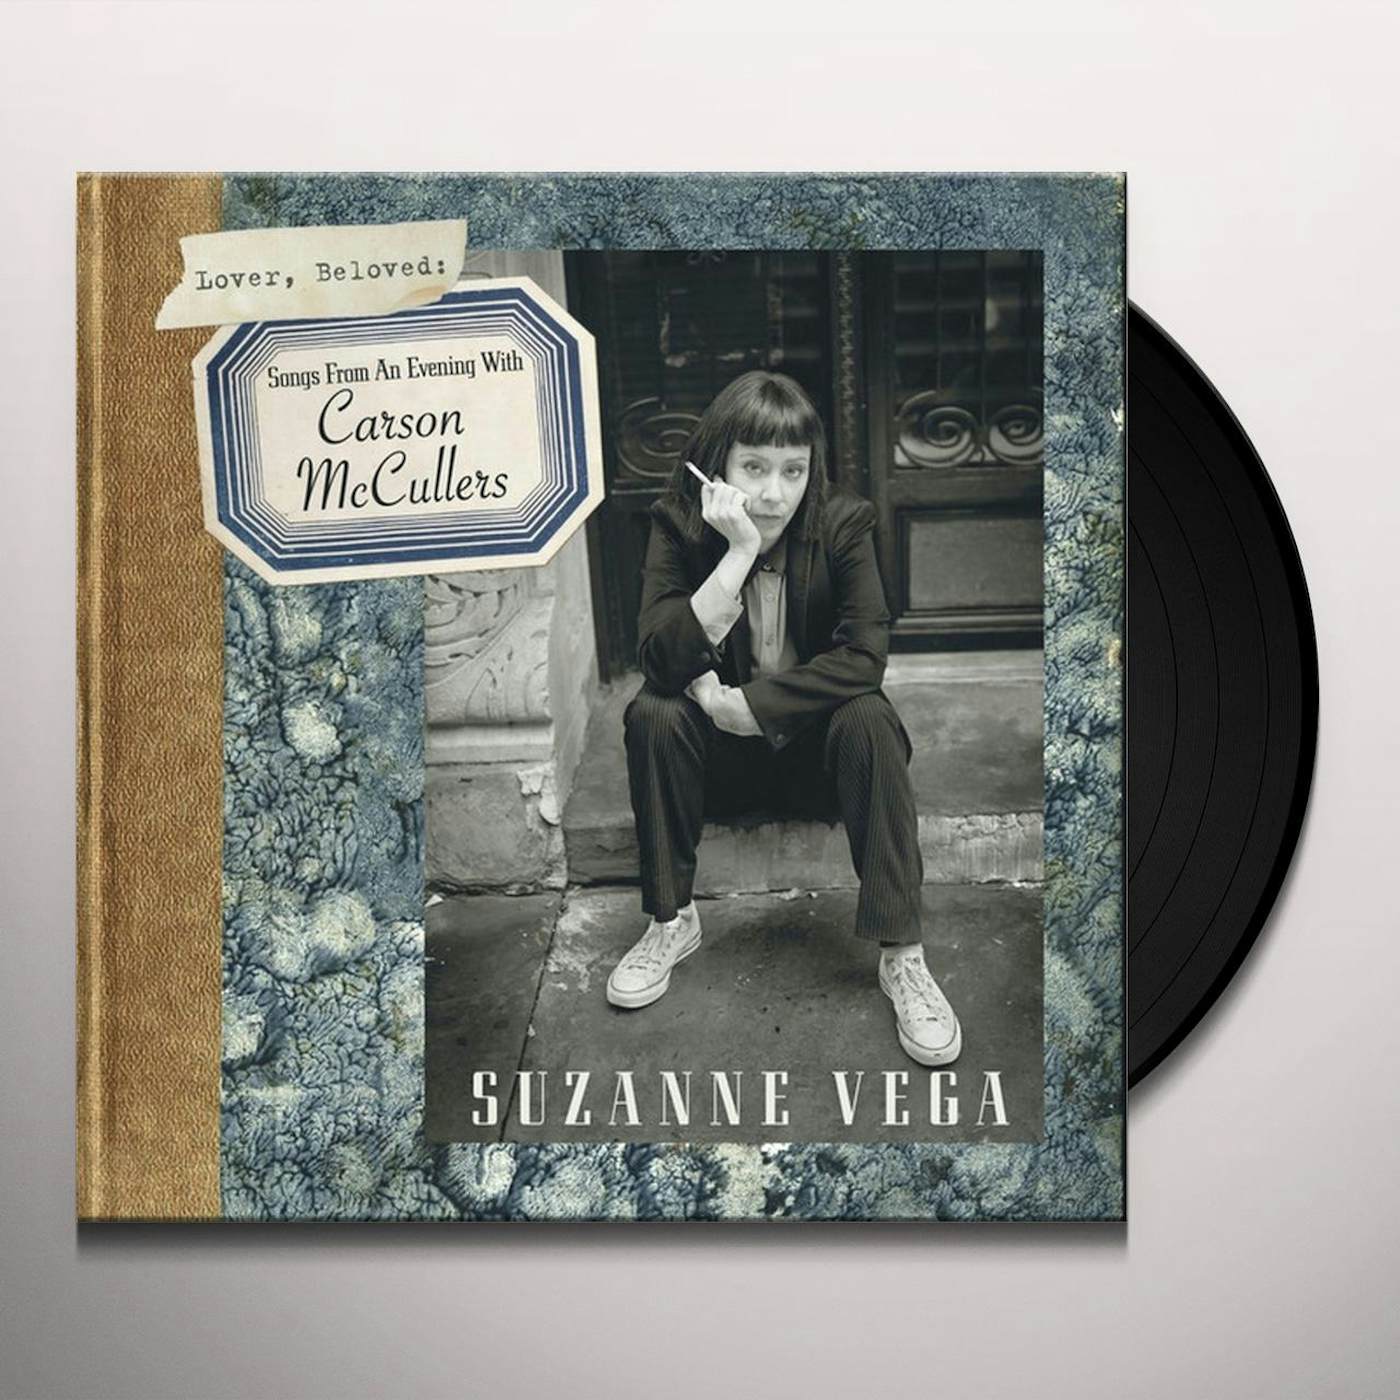 Suzanne Vega LOVER BELOVED: SONGS FROM AN EVENING WITH CARSON MCCULLERS Vinyl Record